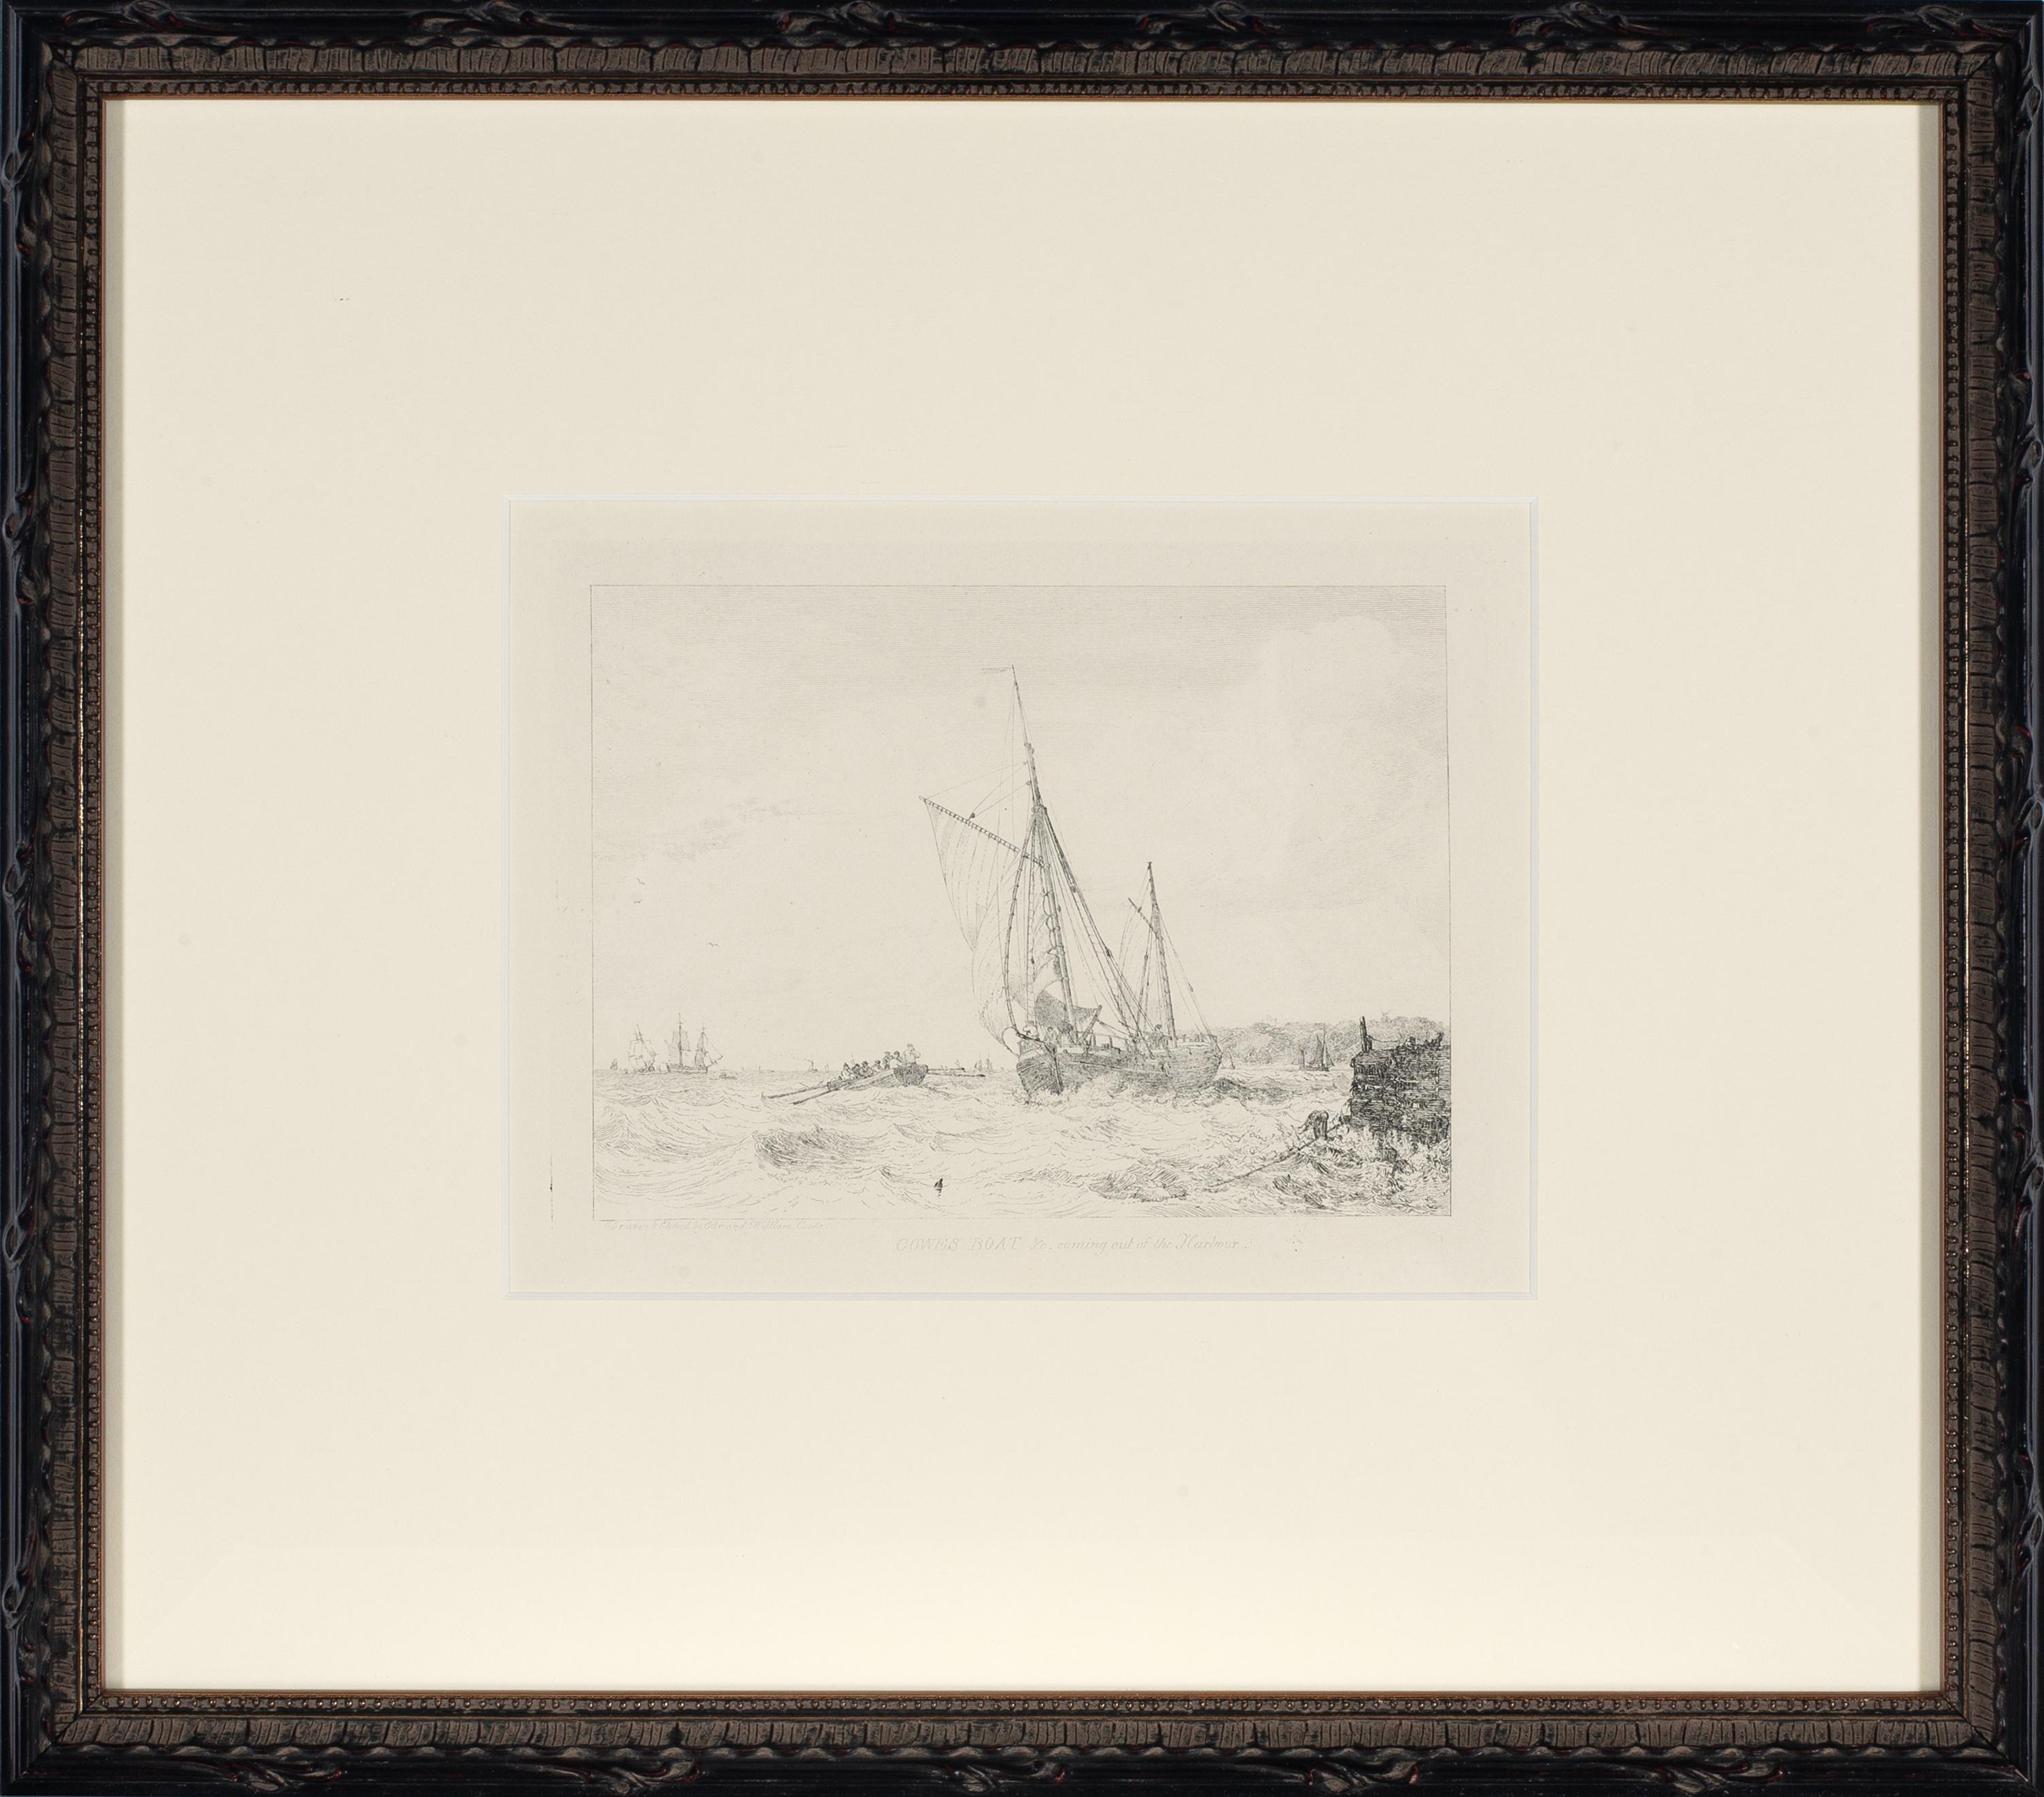 05: Cowes Boat - Print by E. W. Cooke